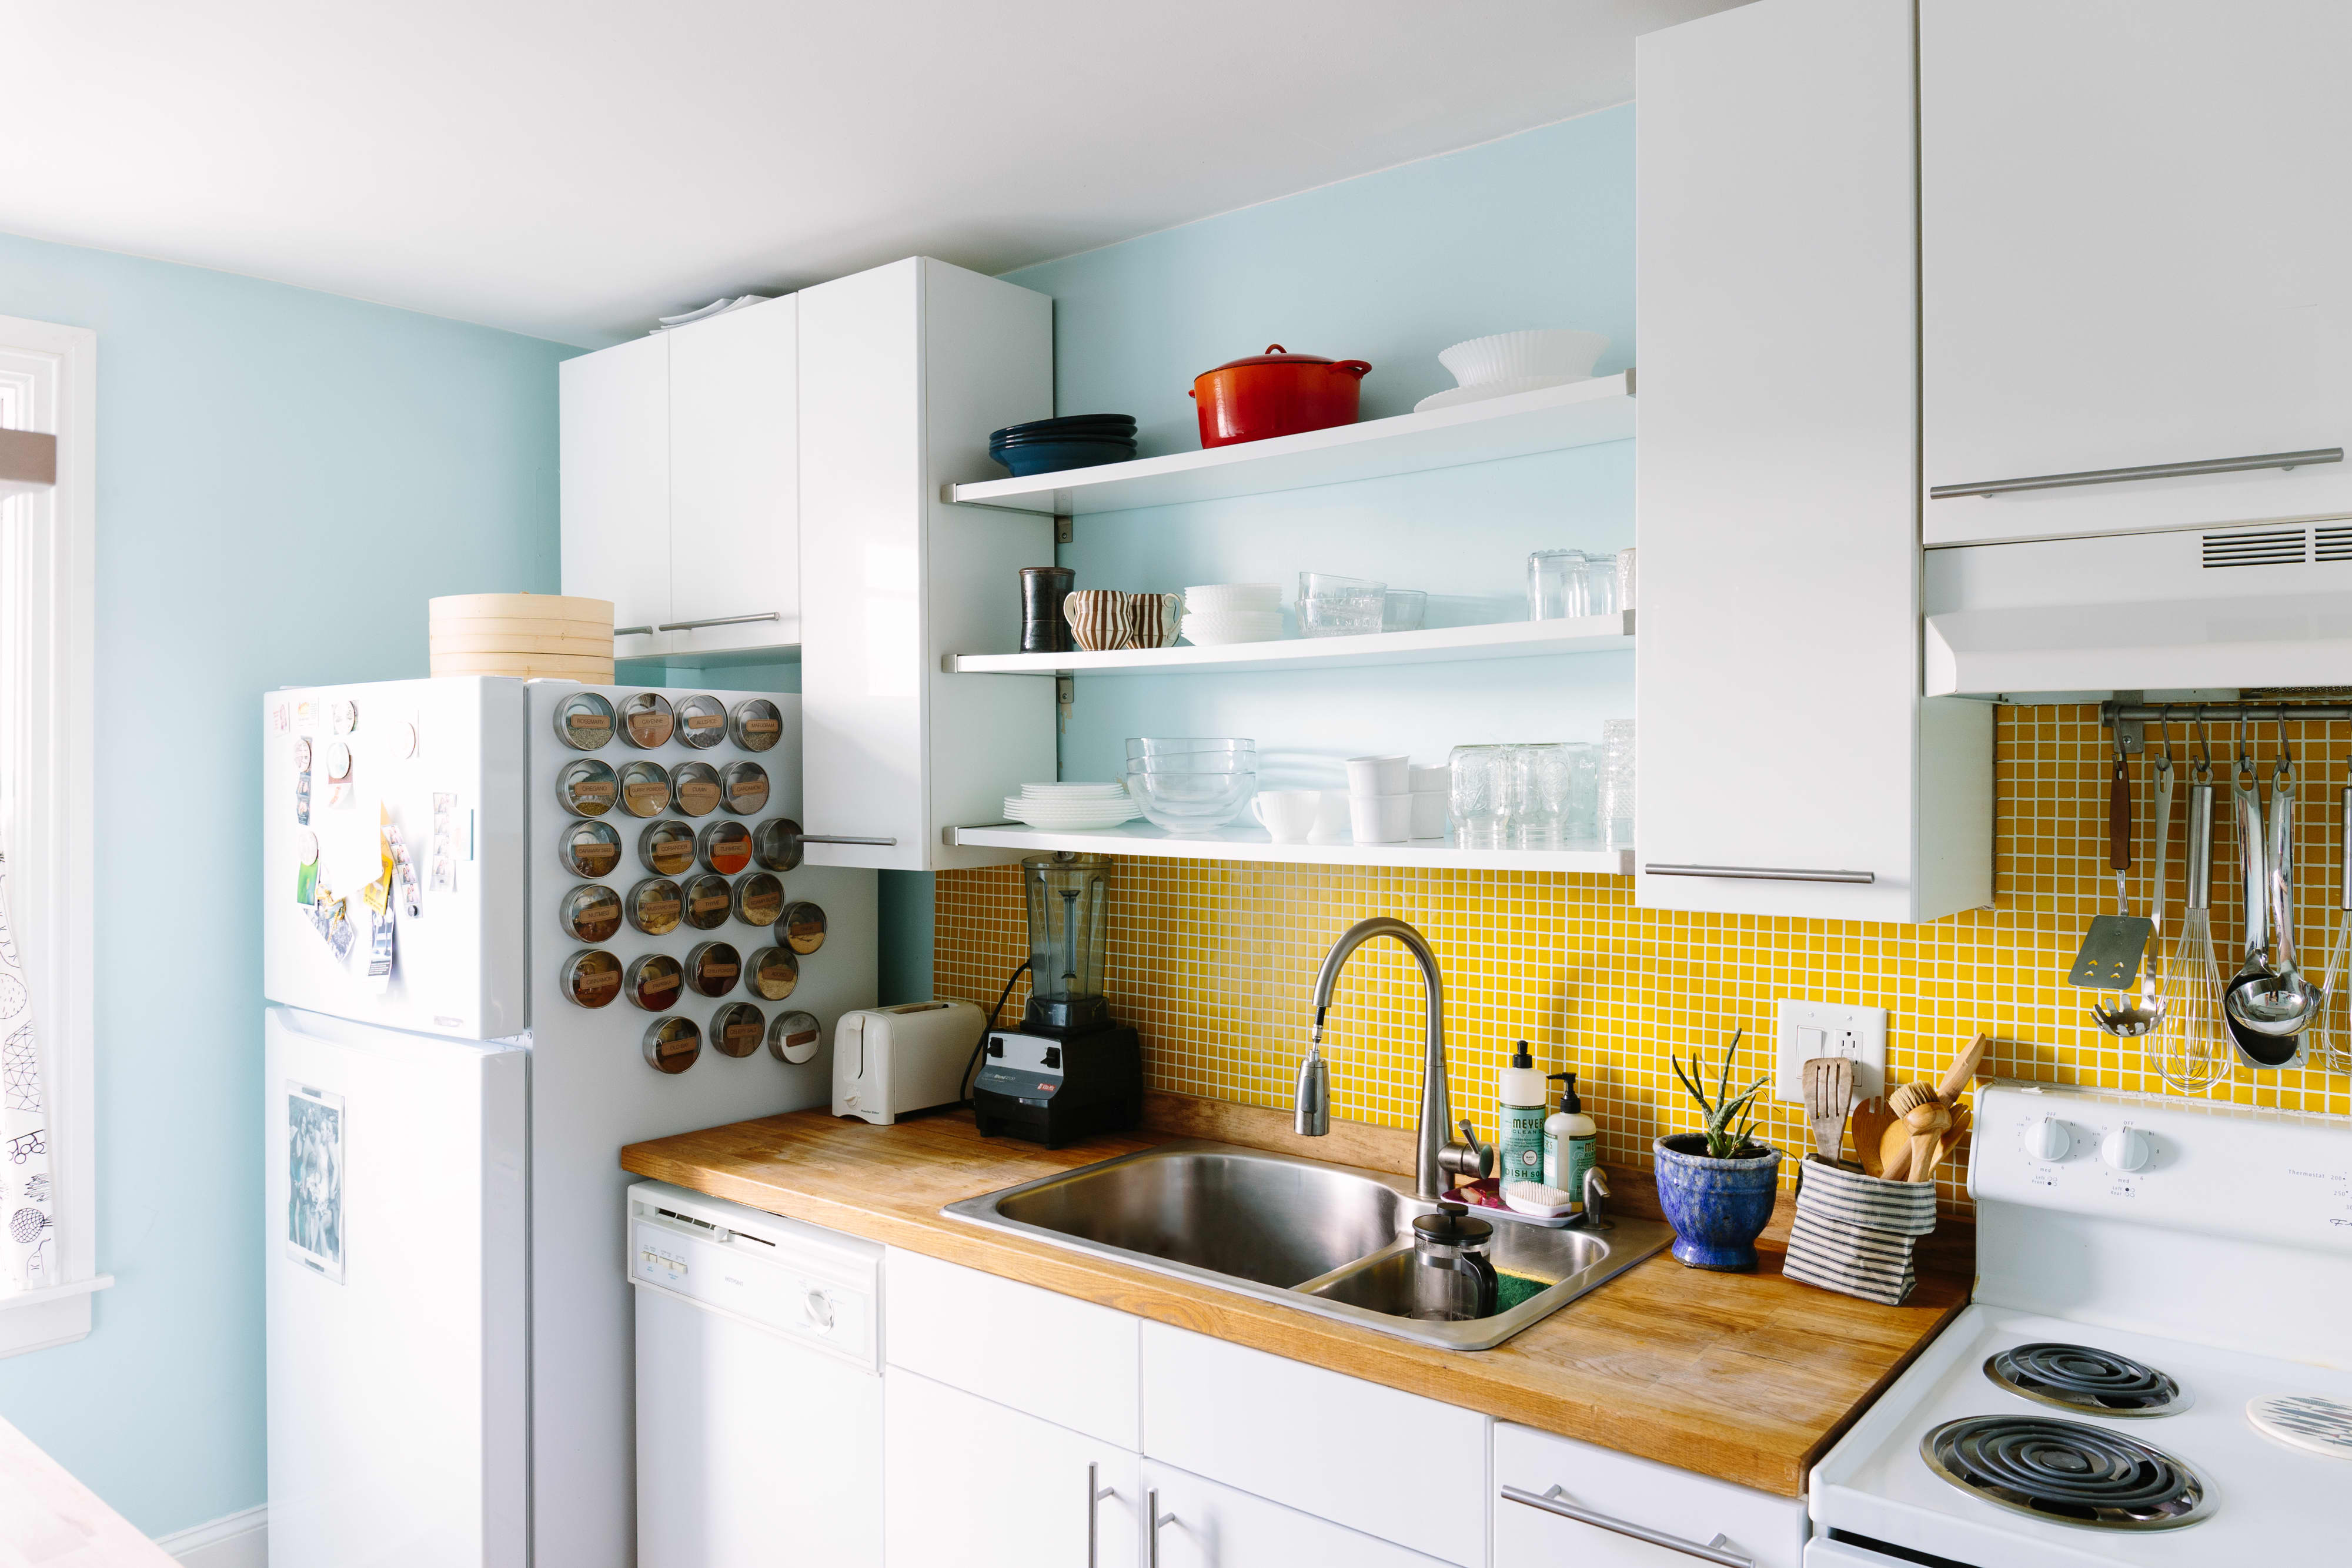 Things to Make Sure Airbnb Kitchen Has